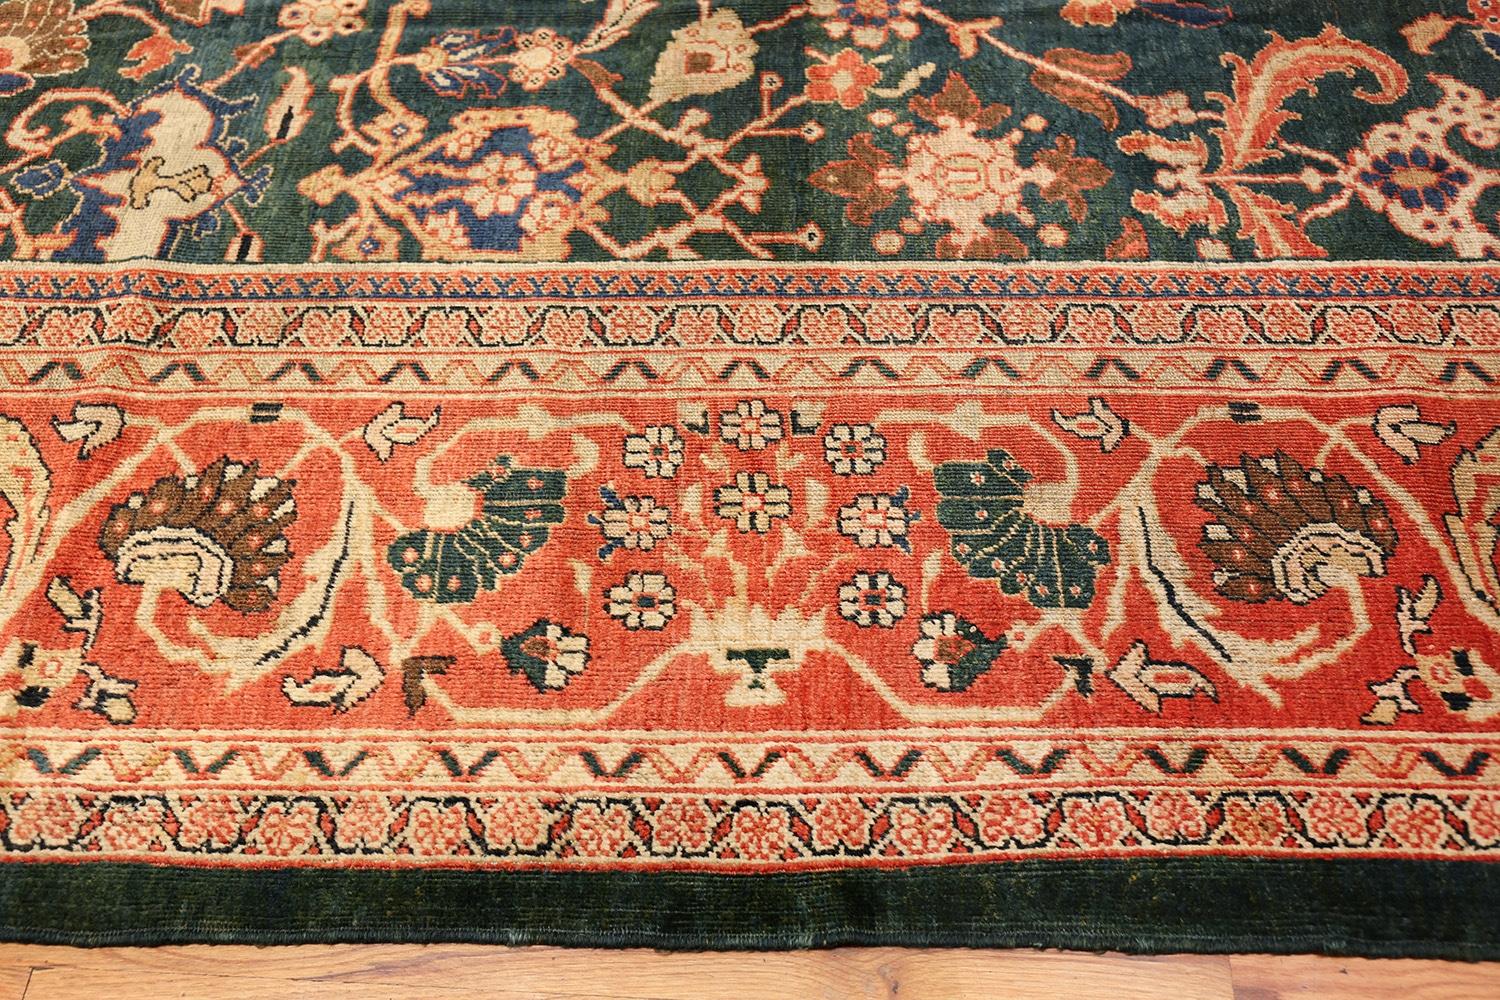 Antique Persian Sultanabad Rug, Country of Origin: Persia, Circa date: 1900. Size: 10 ft 9 in x 14 ft 4 in (3.28 m x 4.37 m)

